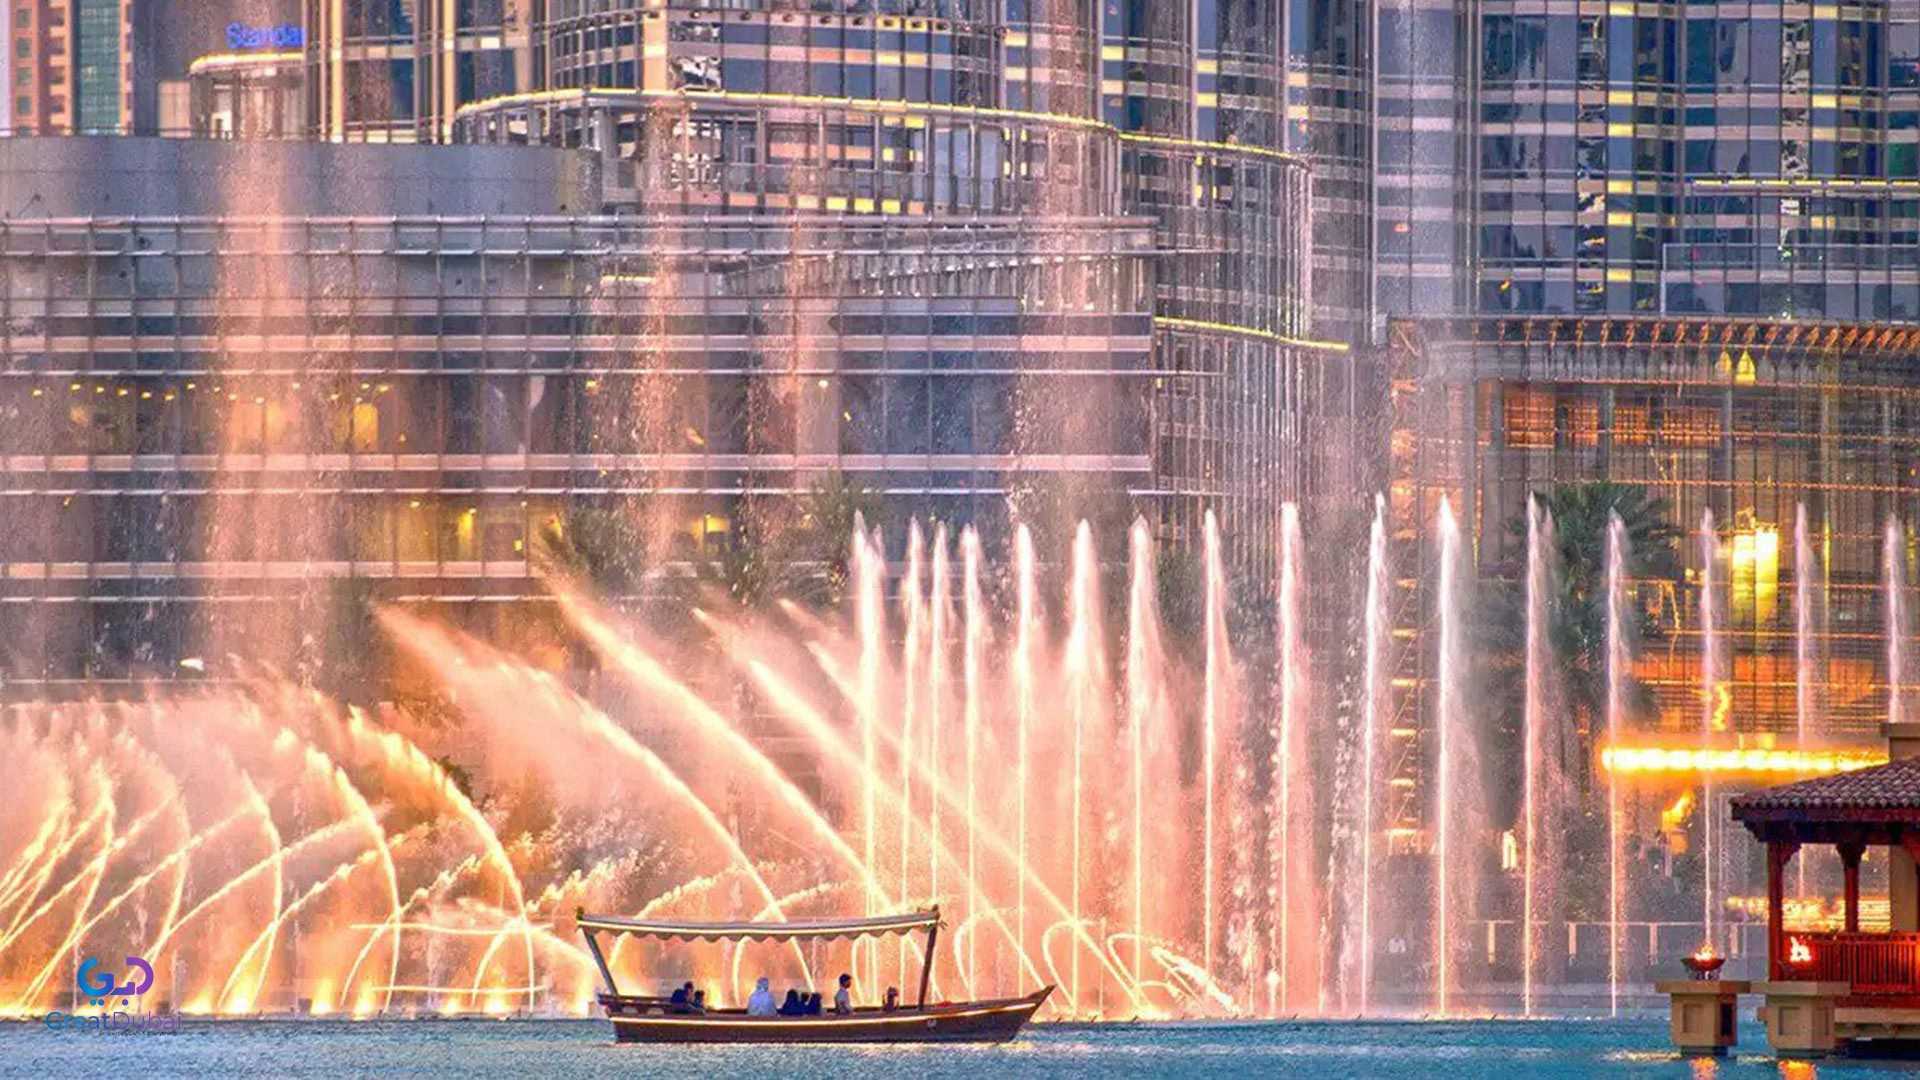 Outdoor Activities, Fitness, and Beauty in Downtown Dubai